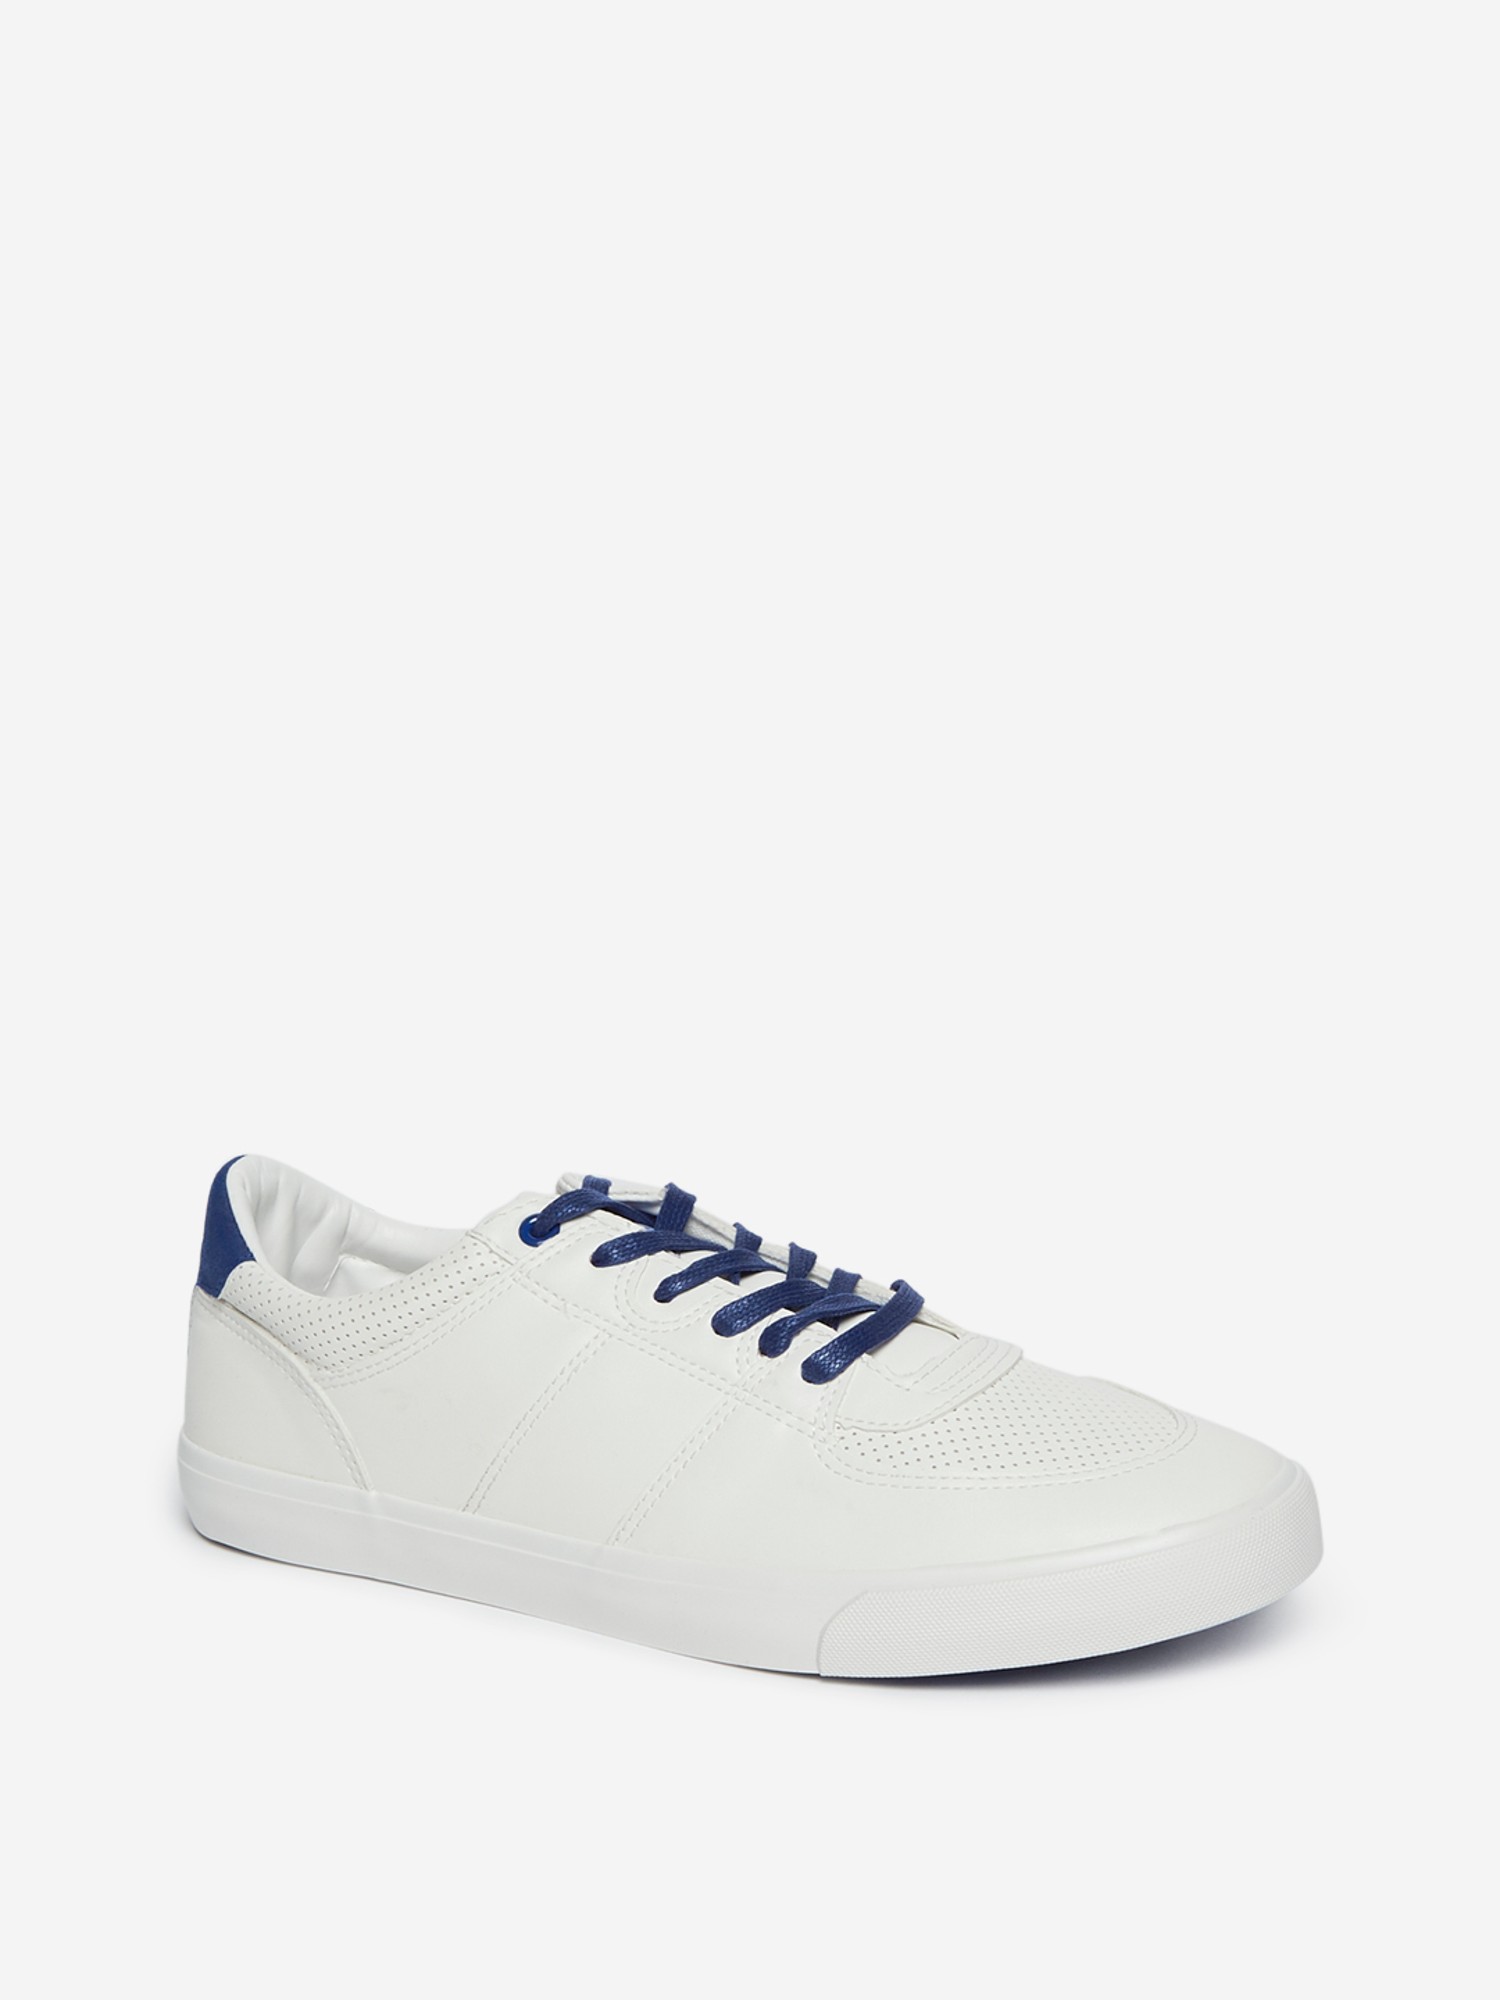 SOLEPLAY by Westside White Lace-Up 